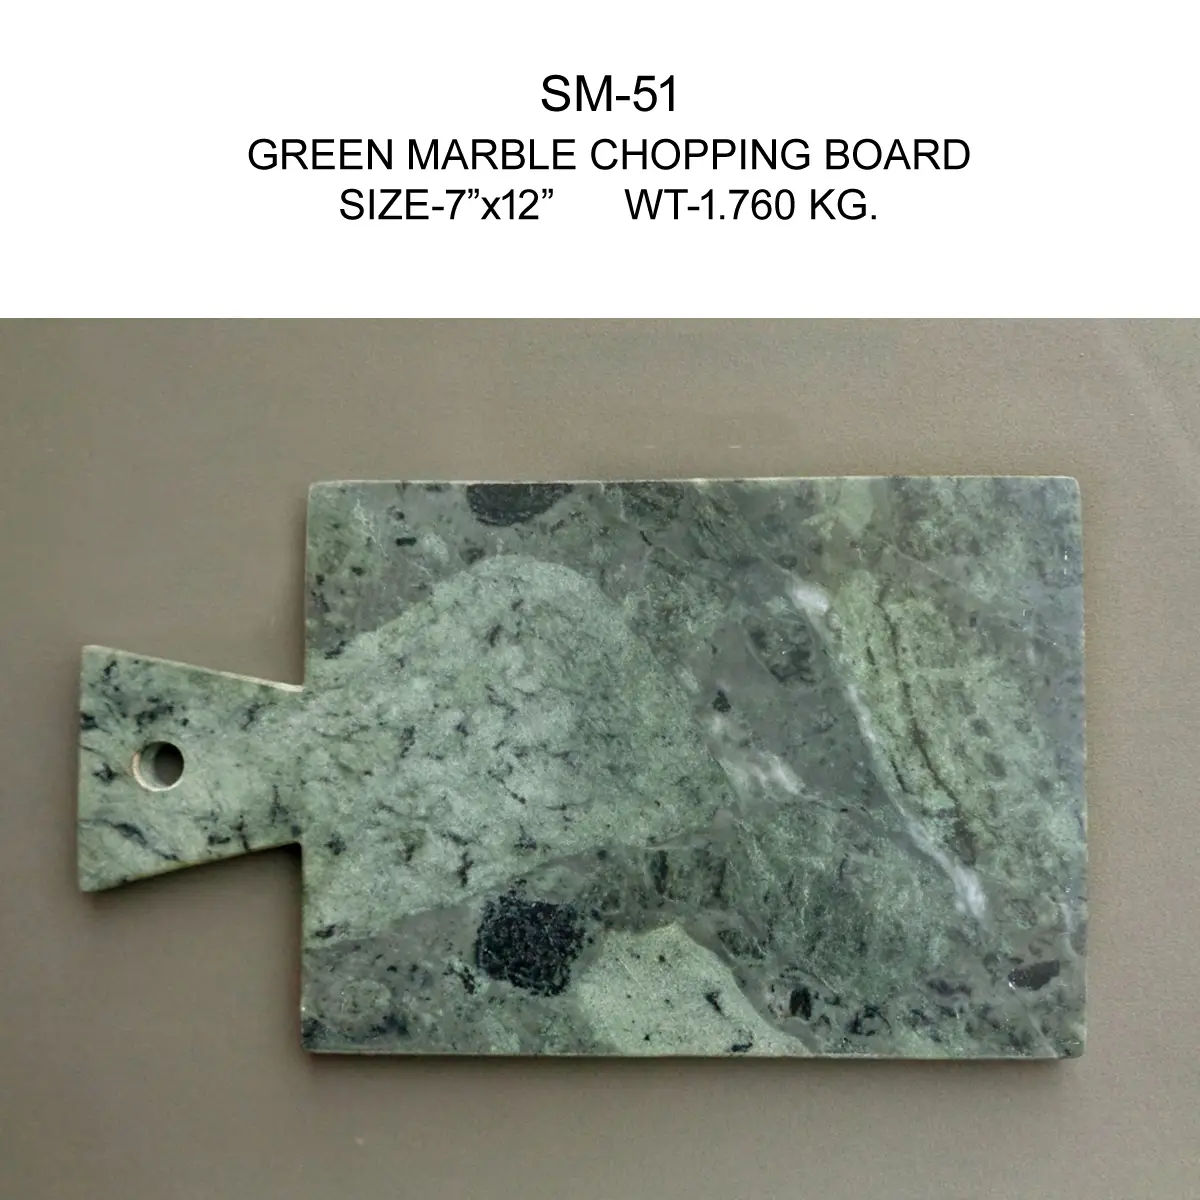 GREEN MARBLE RACTANGLE CHOPPING
BOARD WITH HANDLE